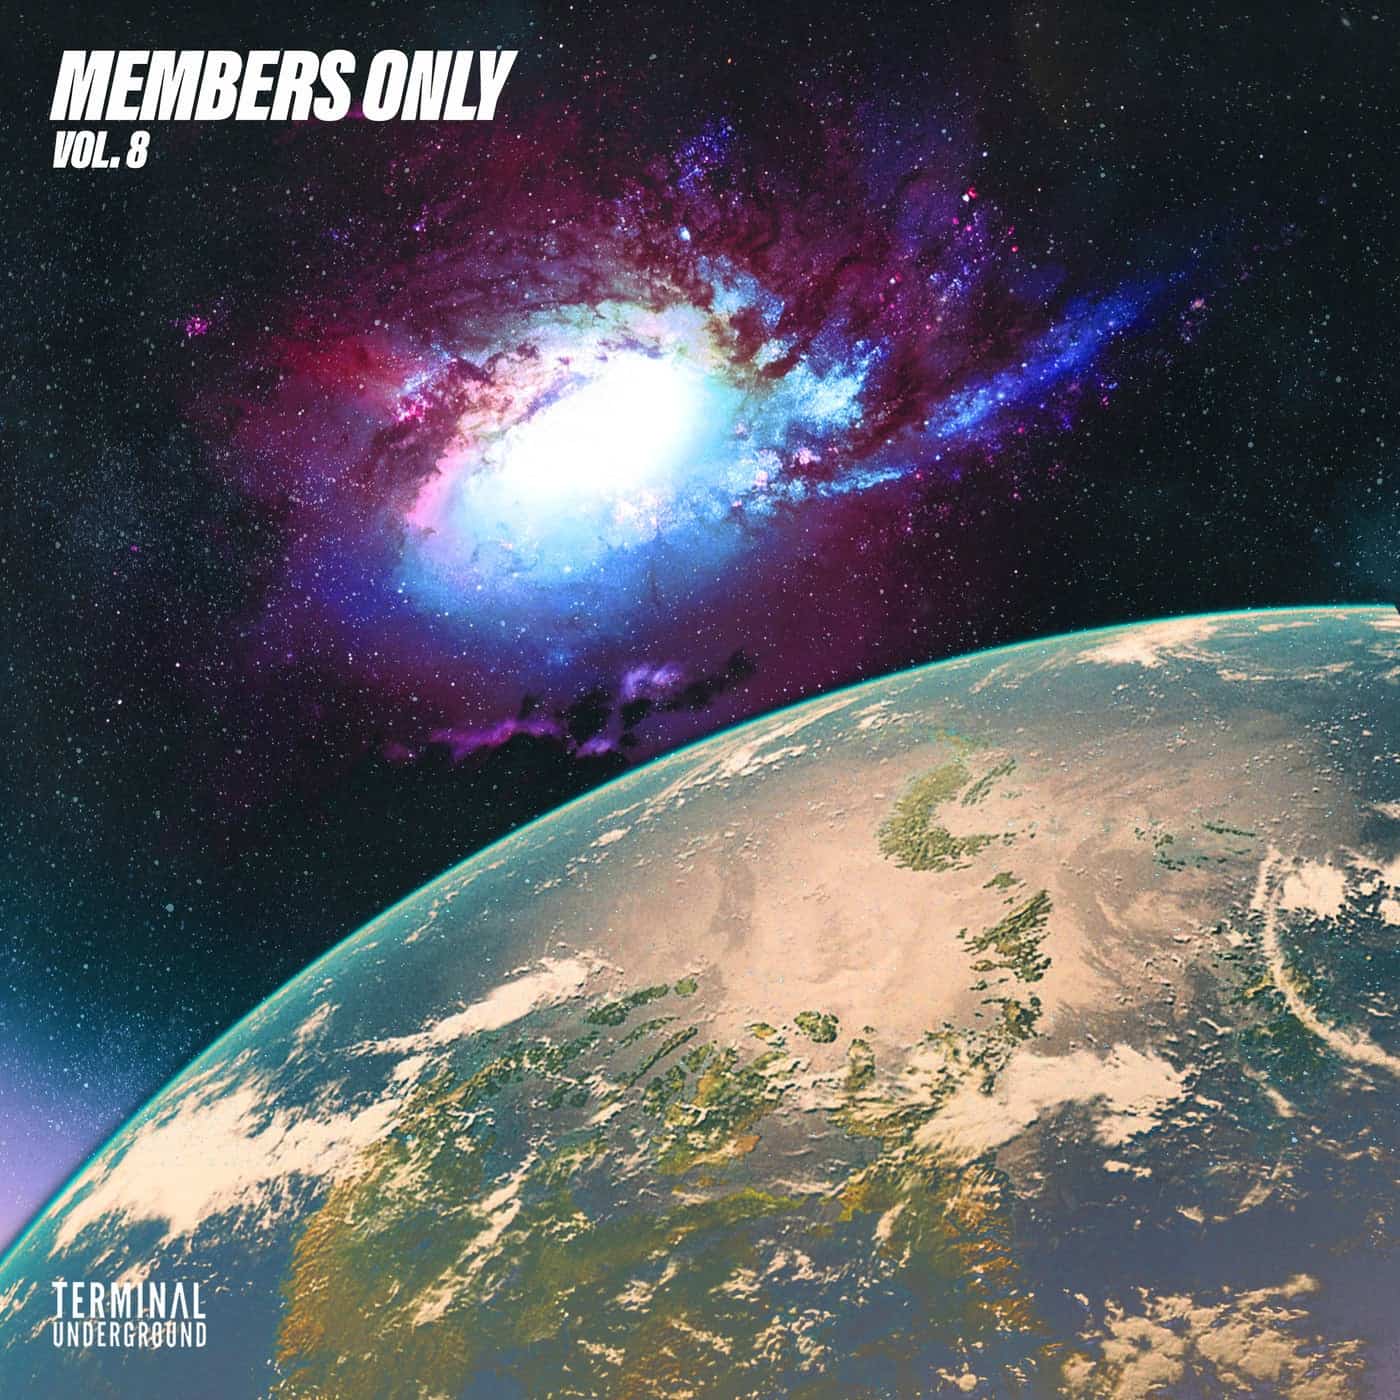 Download VA - Members Only Vol. 8 on Electrobuzz